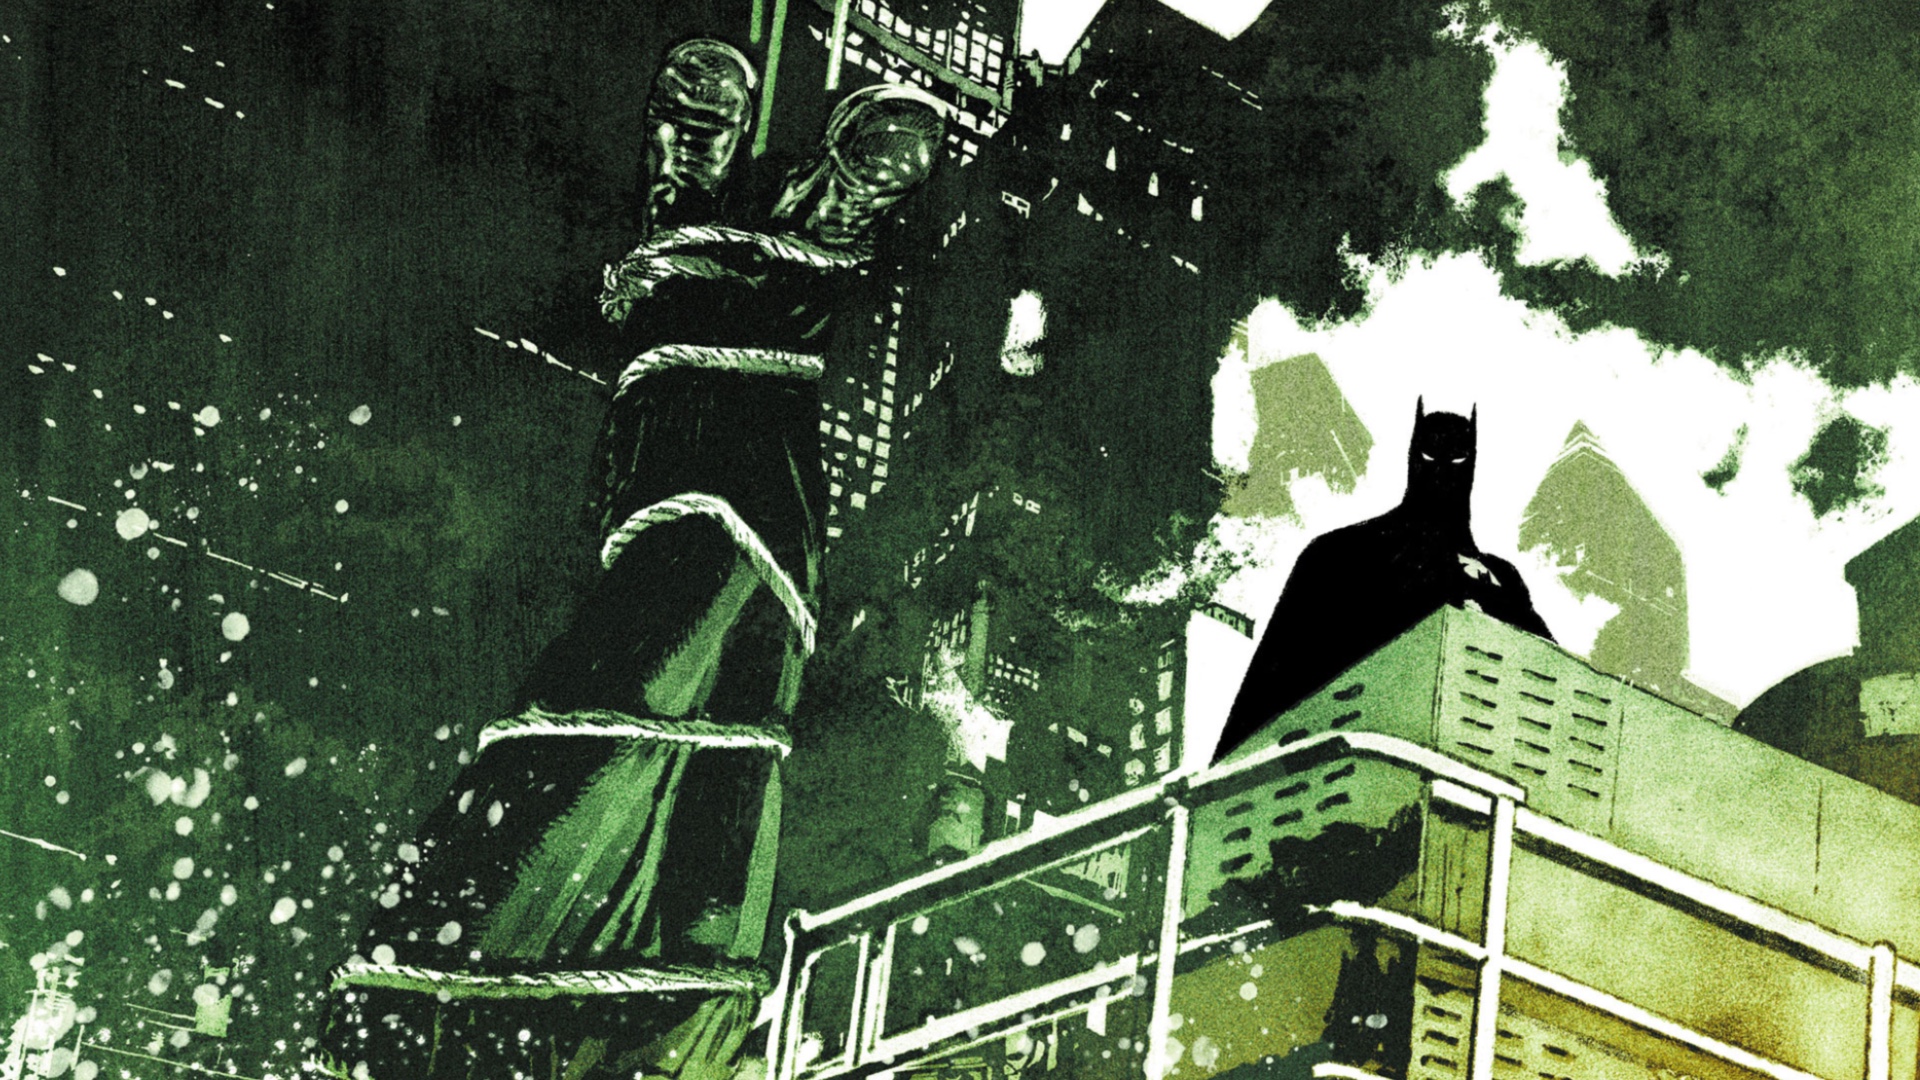 DC reveals more Batman: One Bad Day - The Riddler #1 covers at SDCC |  GamesRadar+